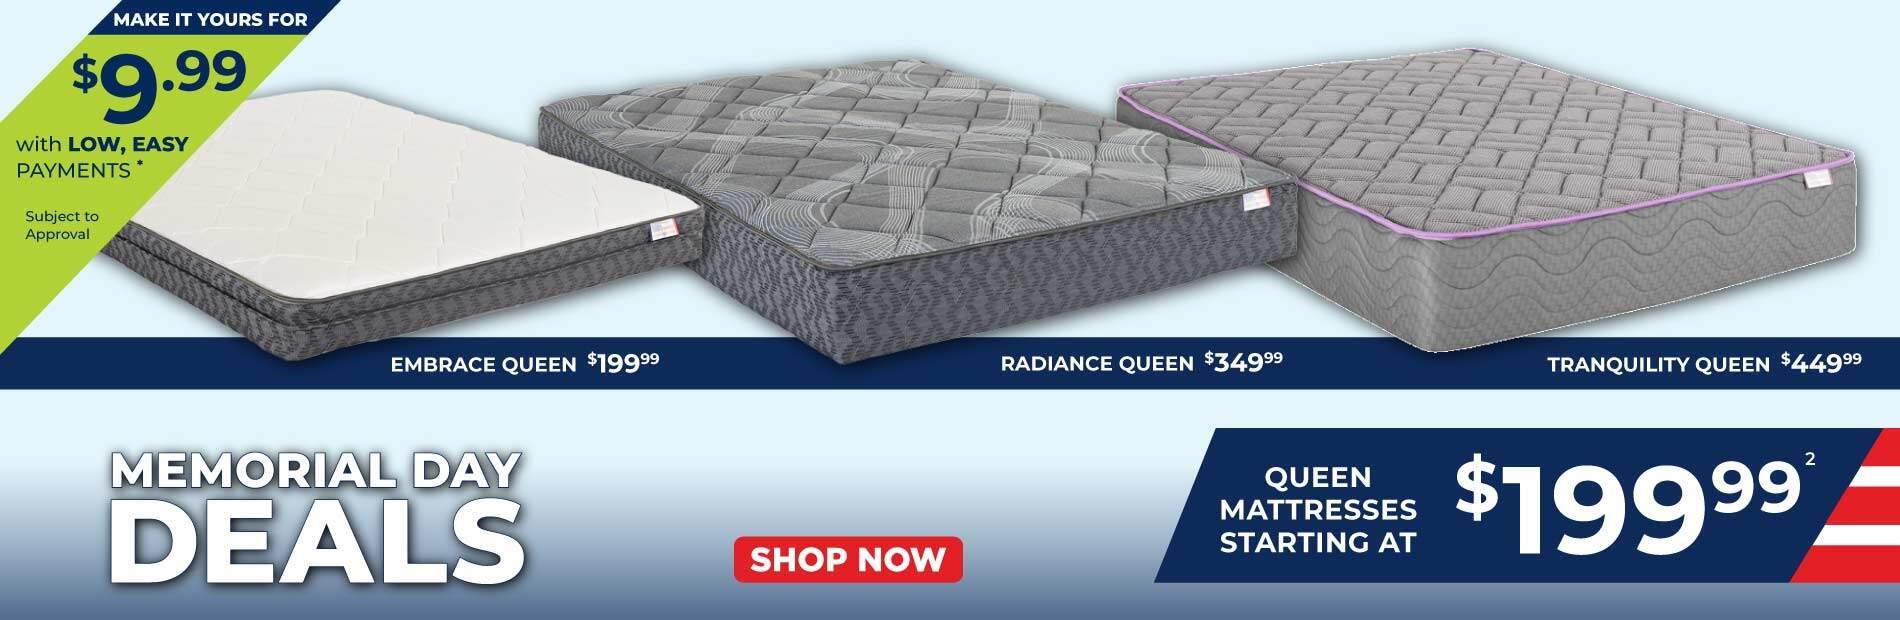 Make it yours for 9.99 with low, easy payments. Subject to approval. Memorial Day Deals. Embrace queen 199.99. Tranquility queen 449.99. Queen mattresses starting at 199.99. or make it yours for 50.